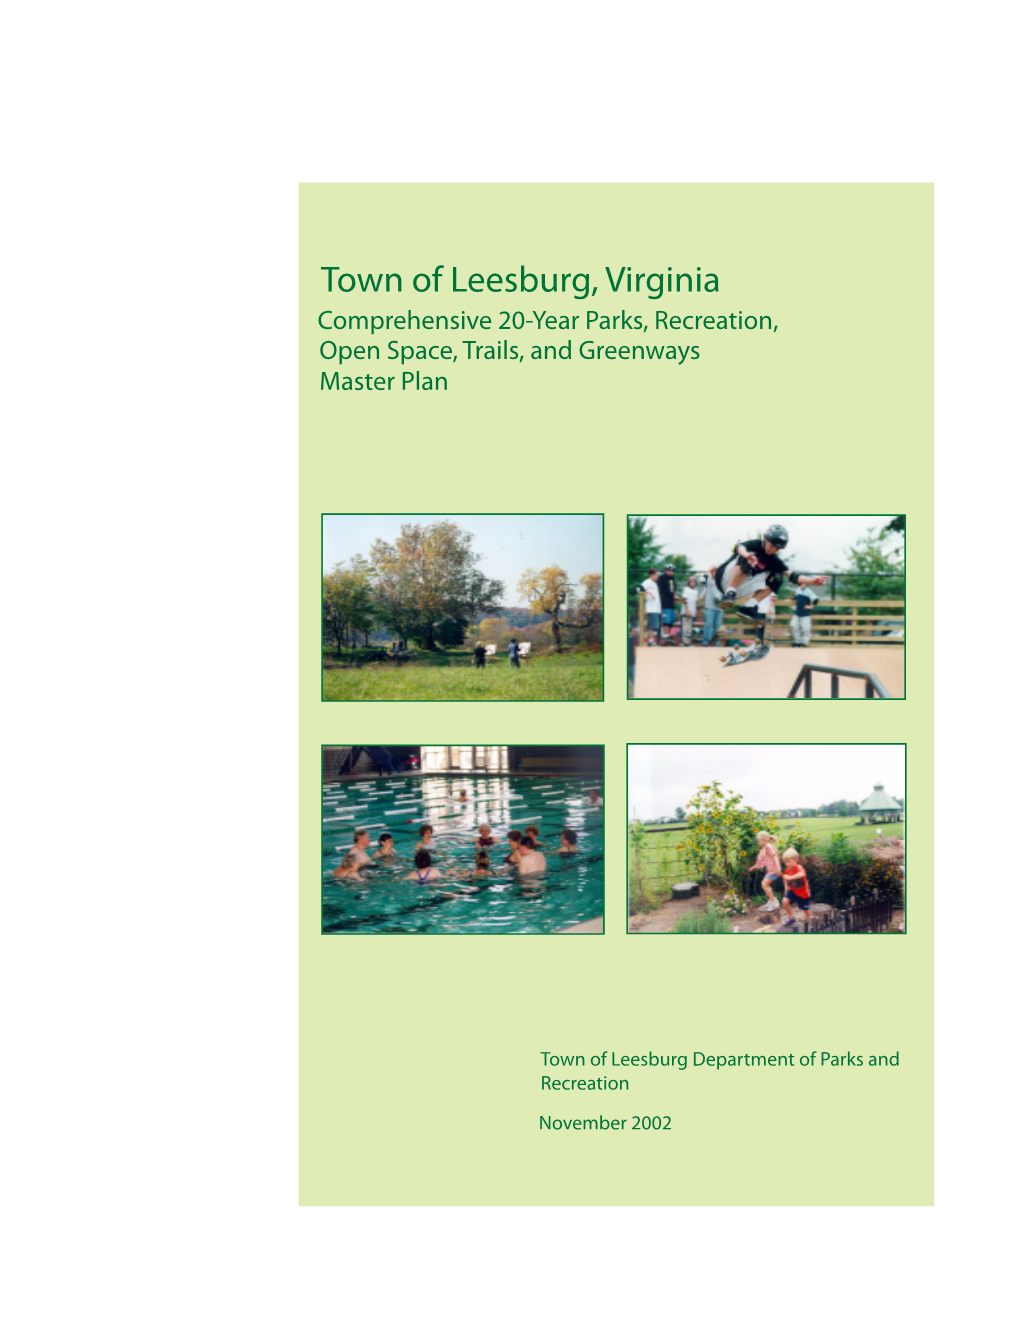 Town of Leesburg, Virginia Comprehensive 20-Year Parks, Recreation, Open Space, Trails, and Greenways Master Plan